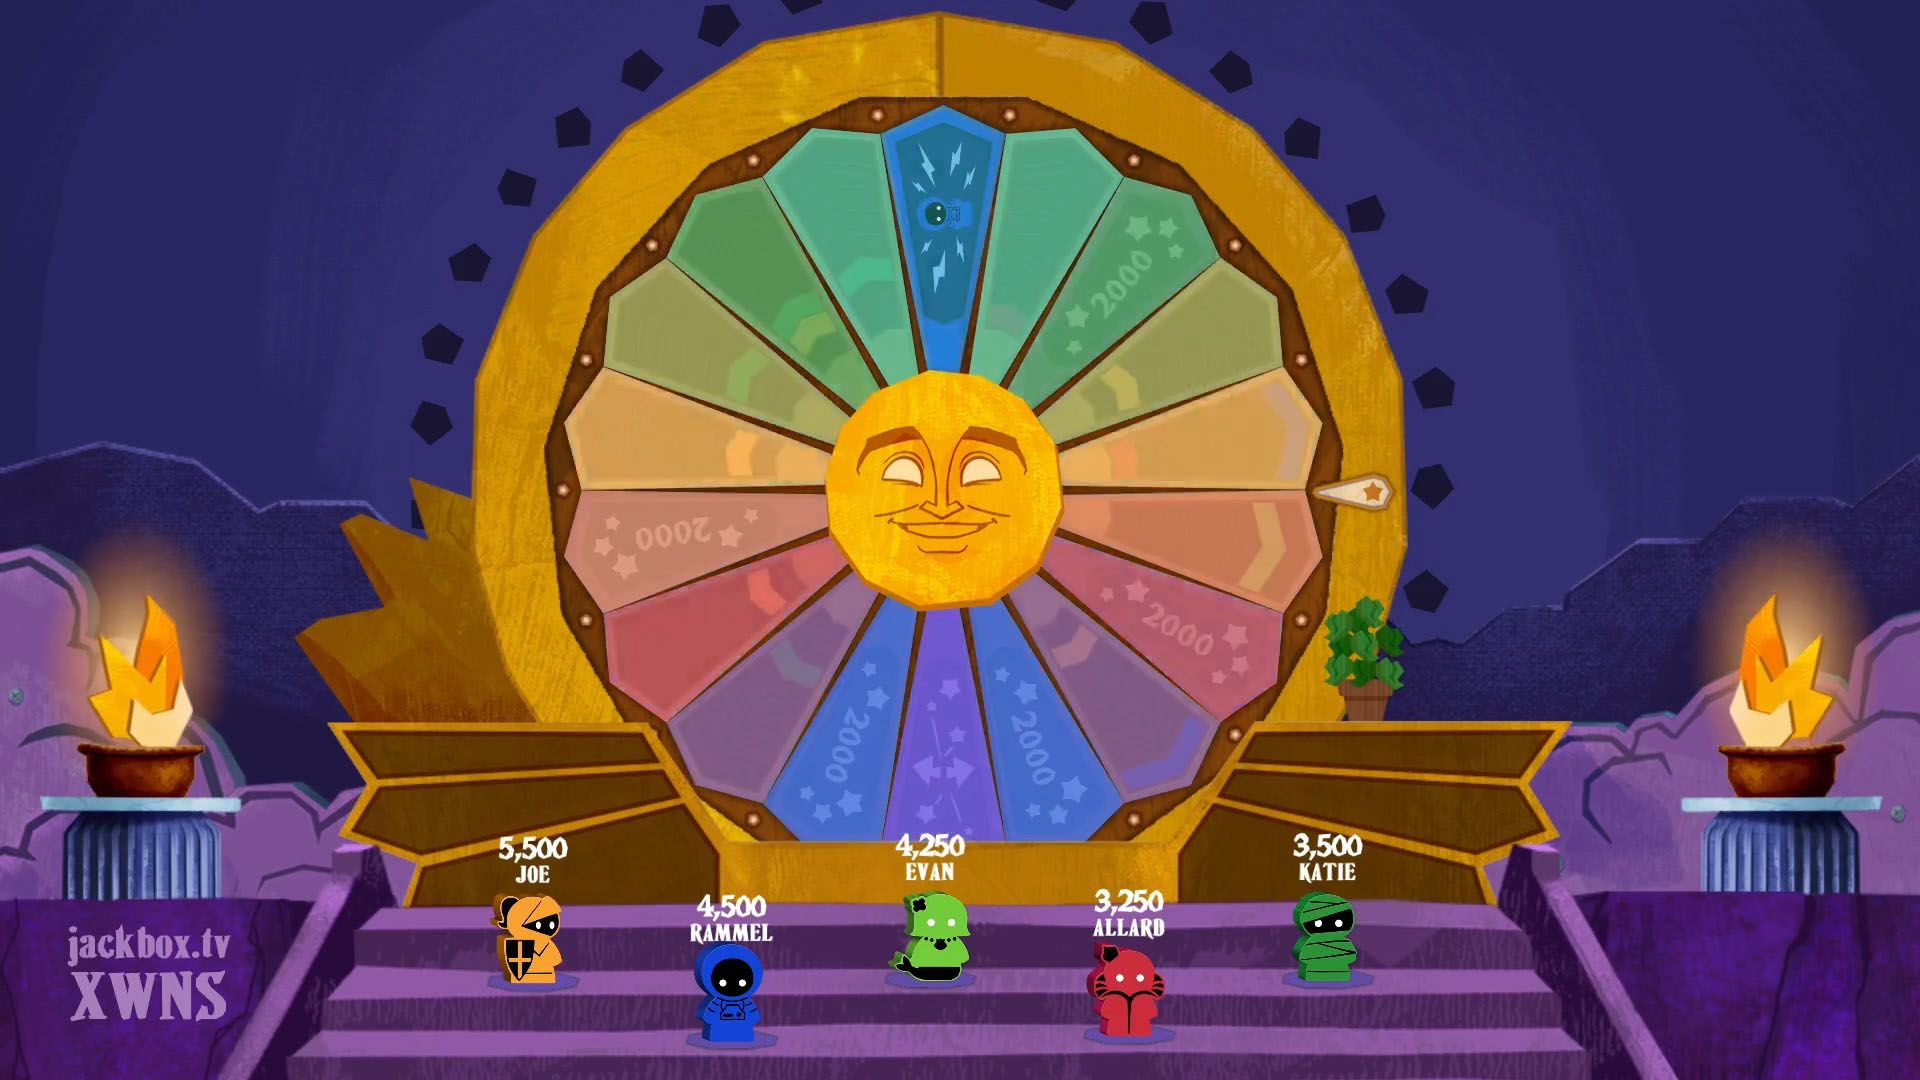 Jackbox Party Pack Wheel Of Enormous Proportions